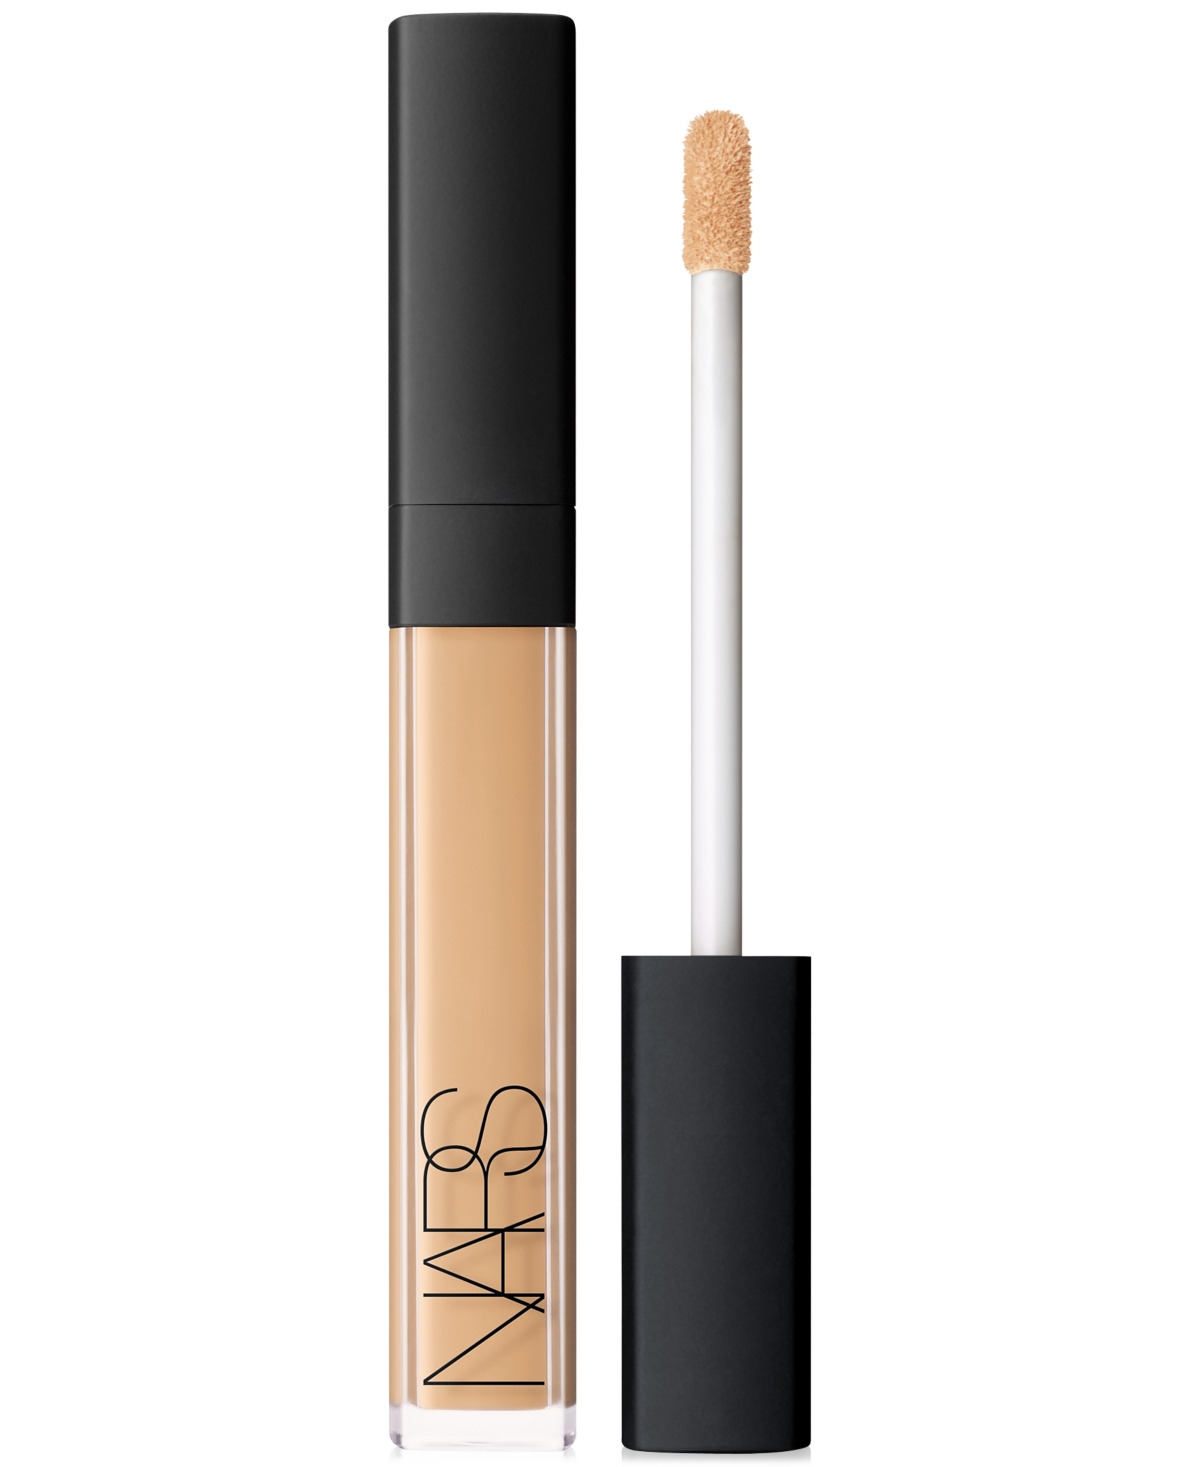 Nars Radiant Creamy Concealer In Cannelle (l. - Light With Warm Undertone